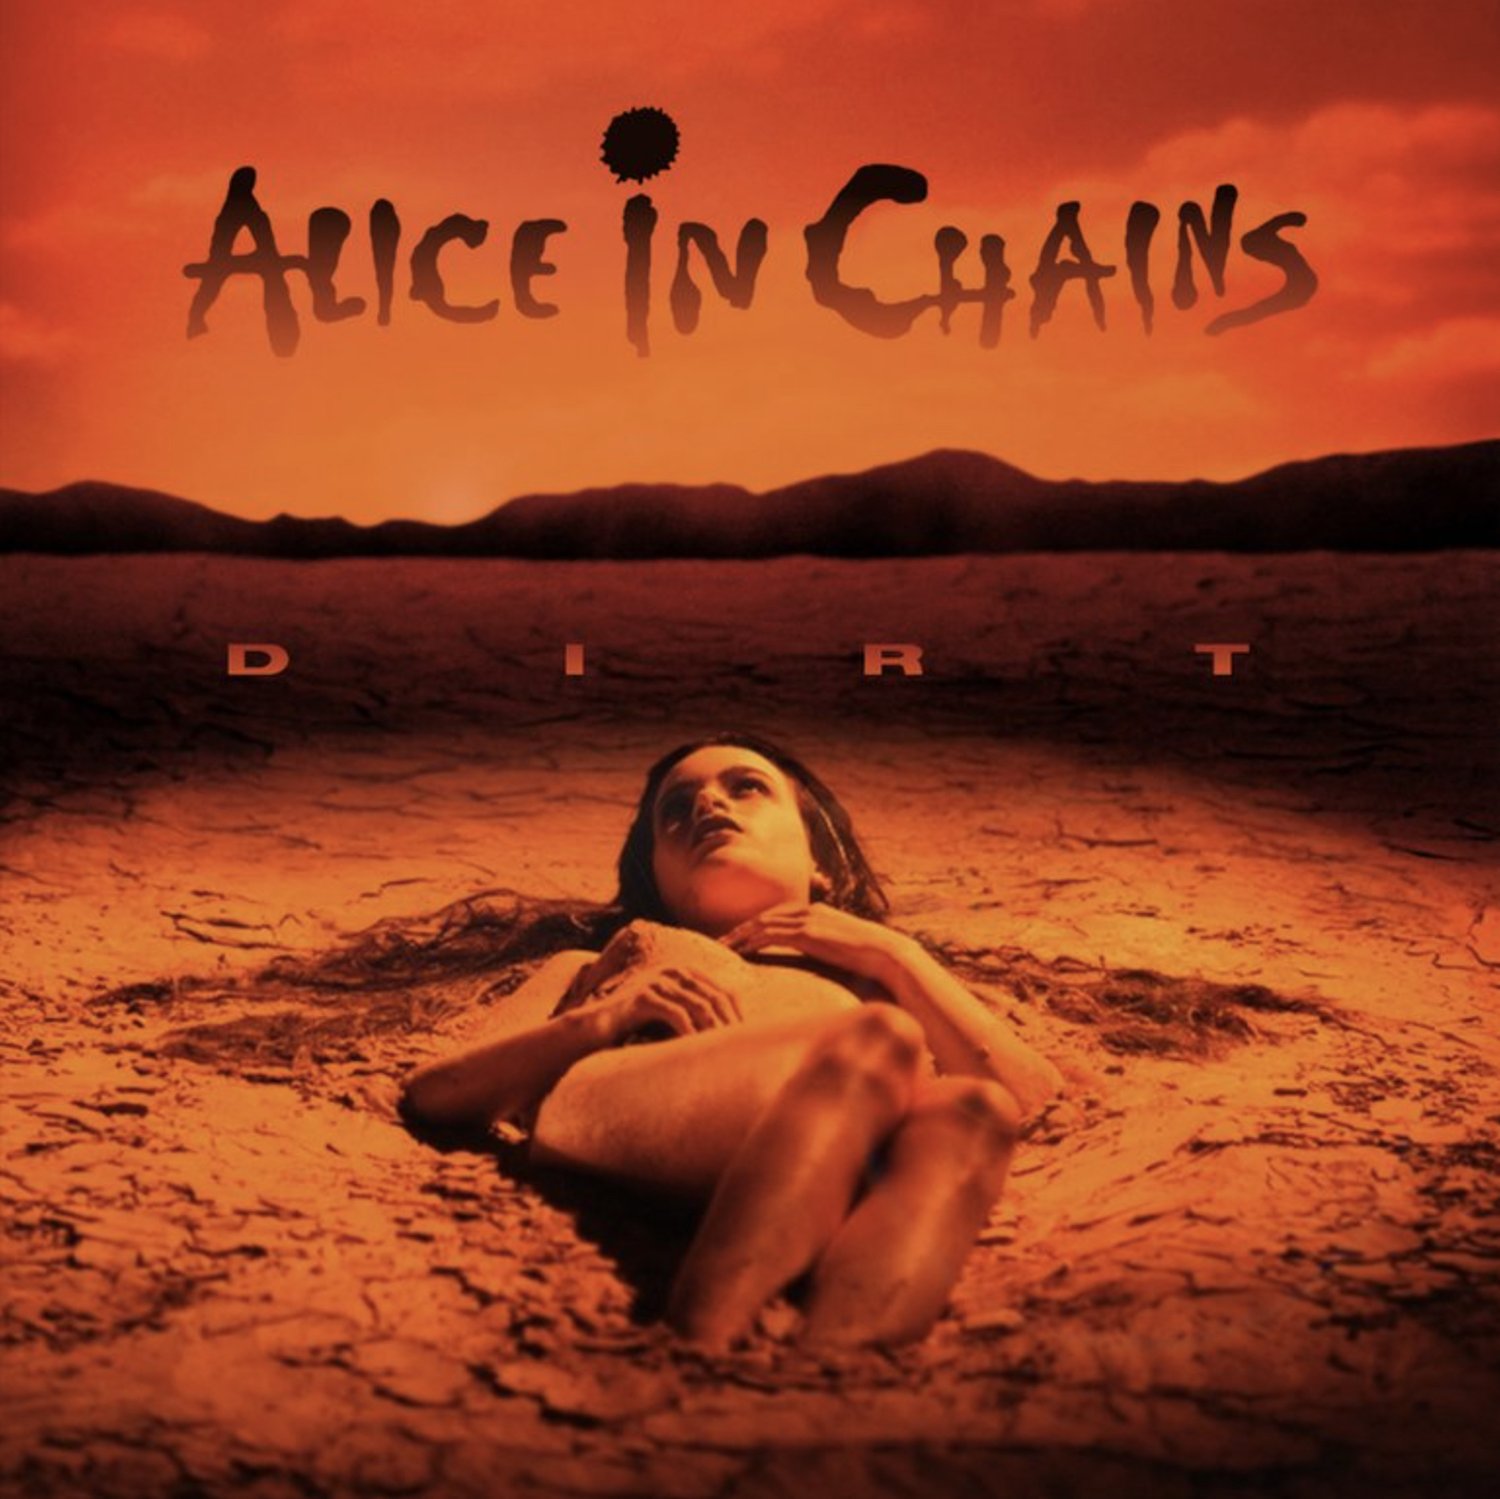 Vol 6, Track 6: "Dirt" by Alice in Chains